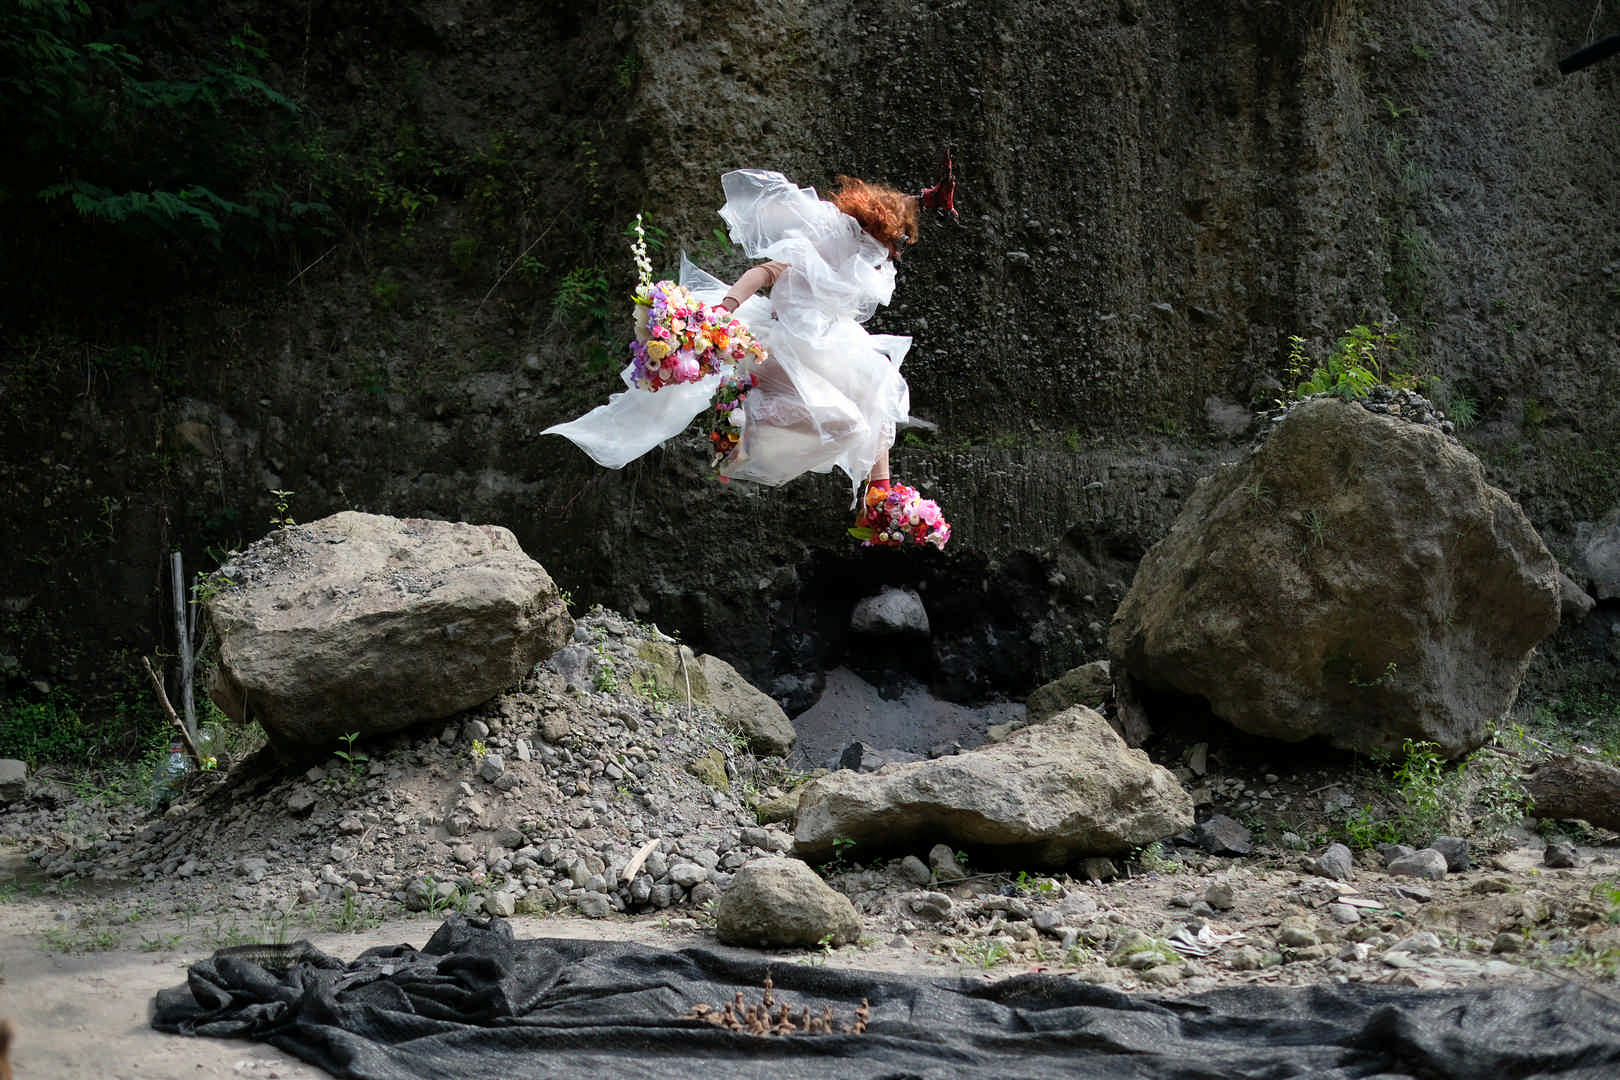 A person dressed in a big white dress, wearing a wig of long curly red hair, aviator goggles, and carrying enormous colourful bouquets of flowers is leaping high into the air from a swathe of grey cloth that is draped on the ground. There is a natural rock wall behind them, large boulders and a mound of broken down stone in their vicinity.